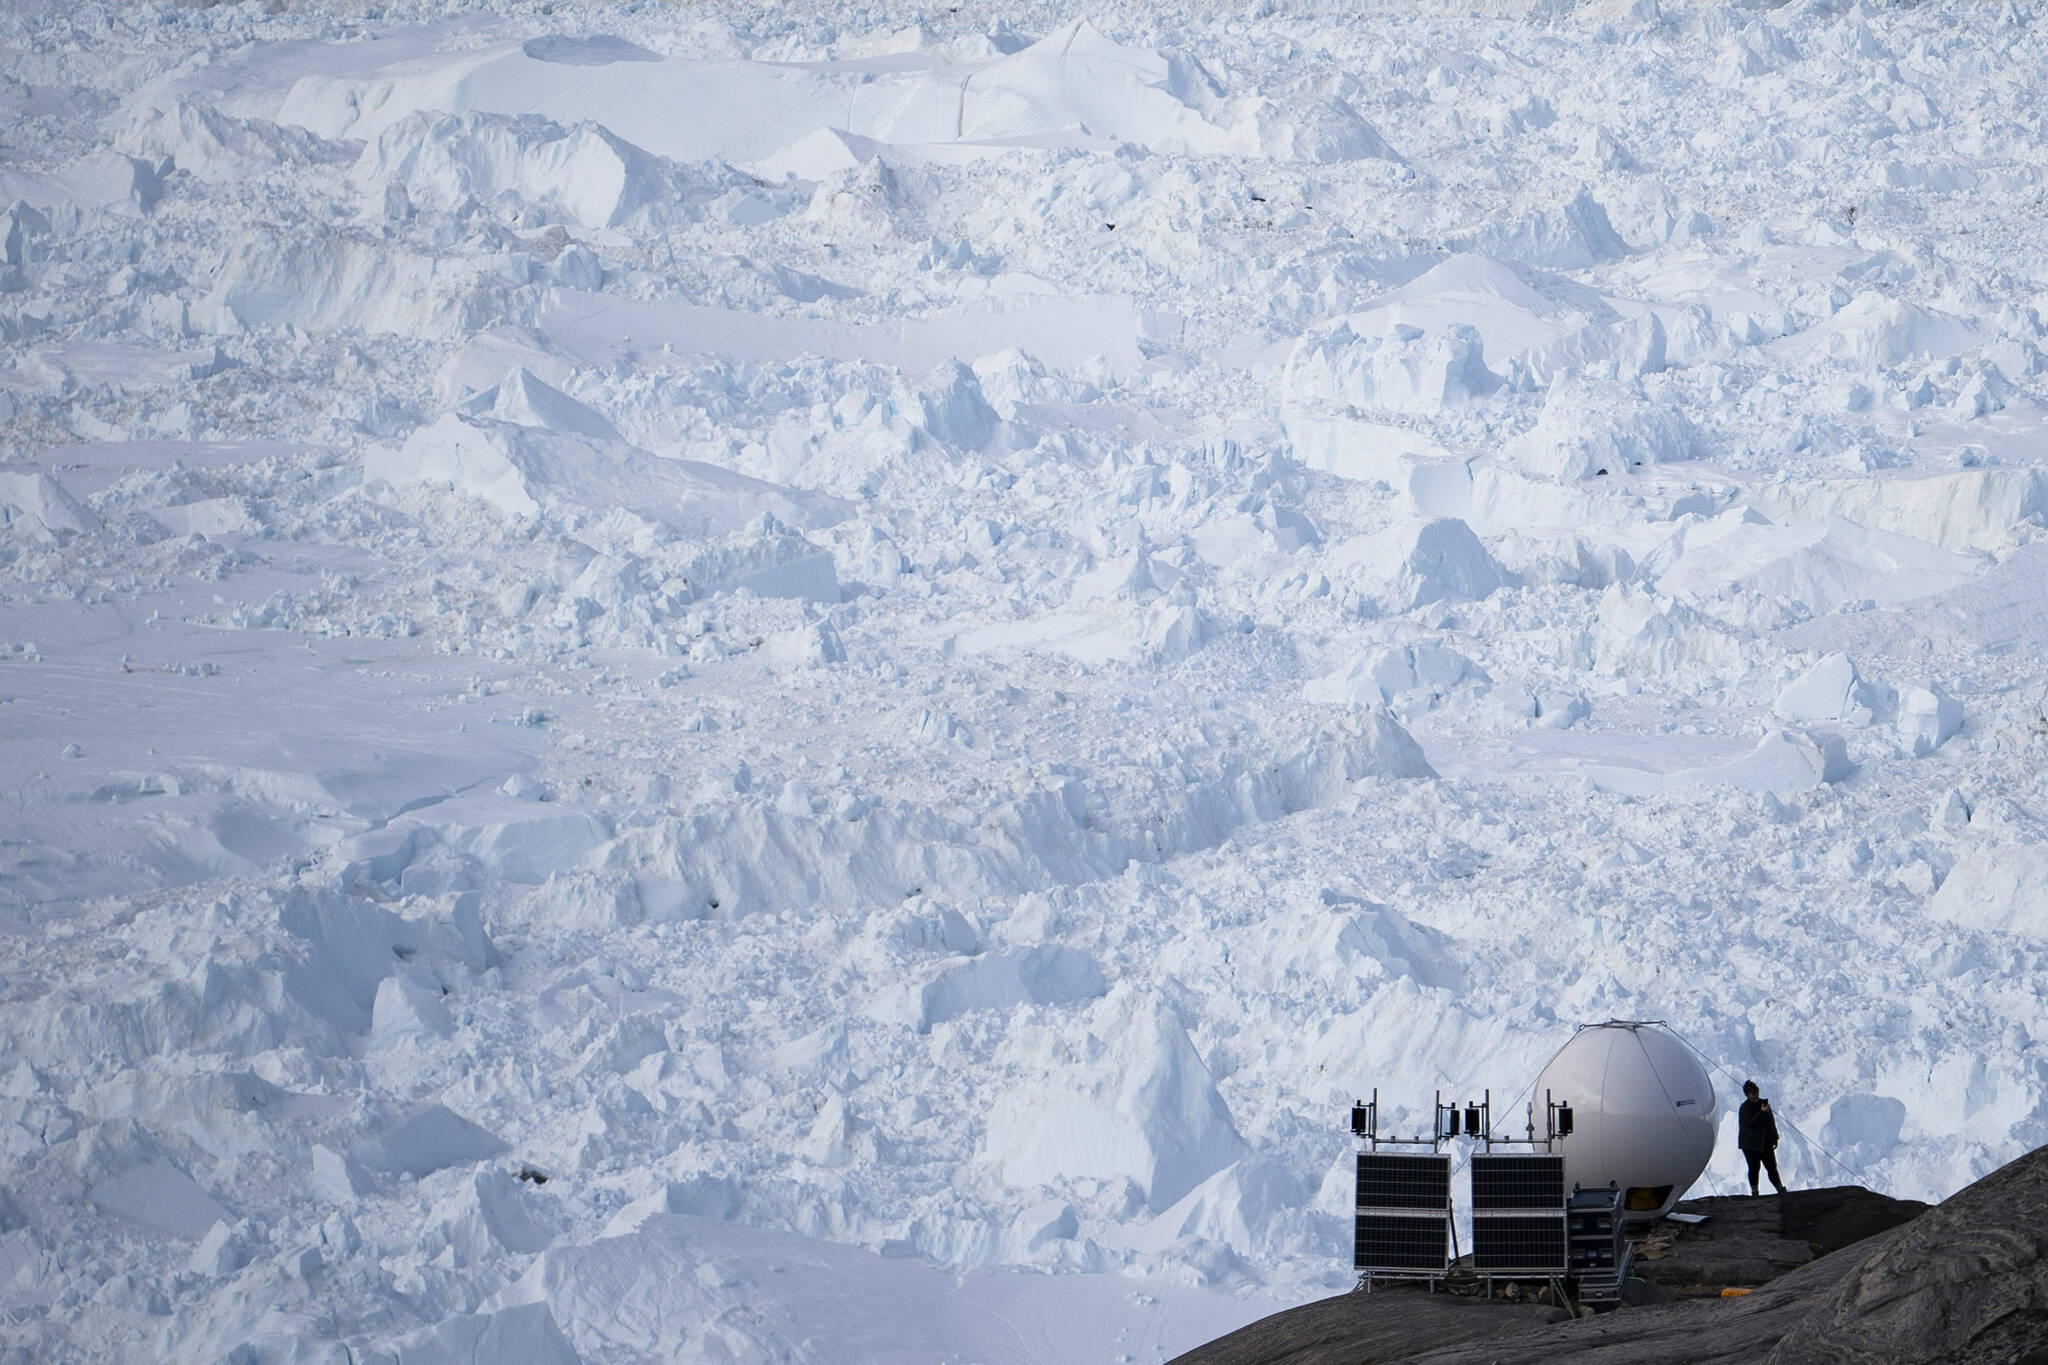 A woman stands next to an antenna at an NYU base camp at the Helheim glacier in Greenland on Friday, Aug. 16, 2019. In an effort to combat climate change and help develop Arctic communities, the Department of Energy Wednesday announced it was seeking to develop new sustainable energy projects in Alaska. (AP Photo / Felipe Dana)